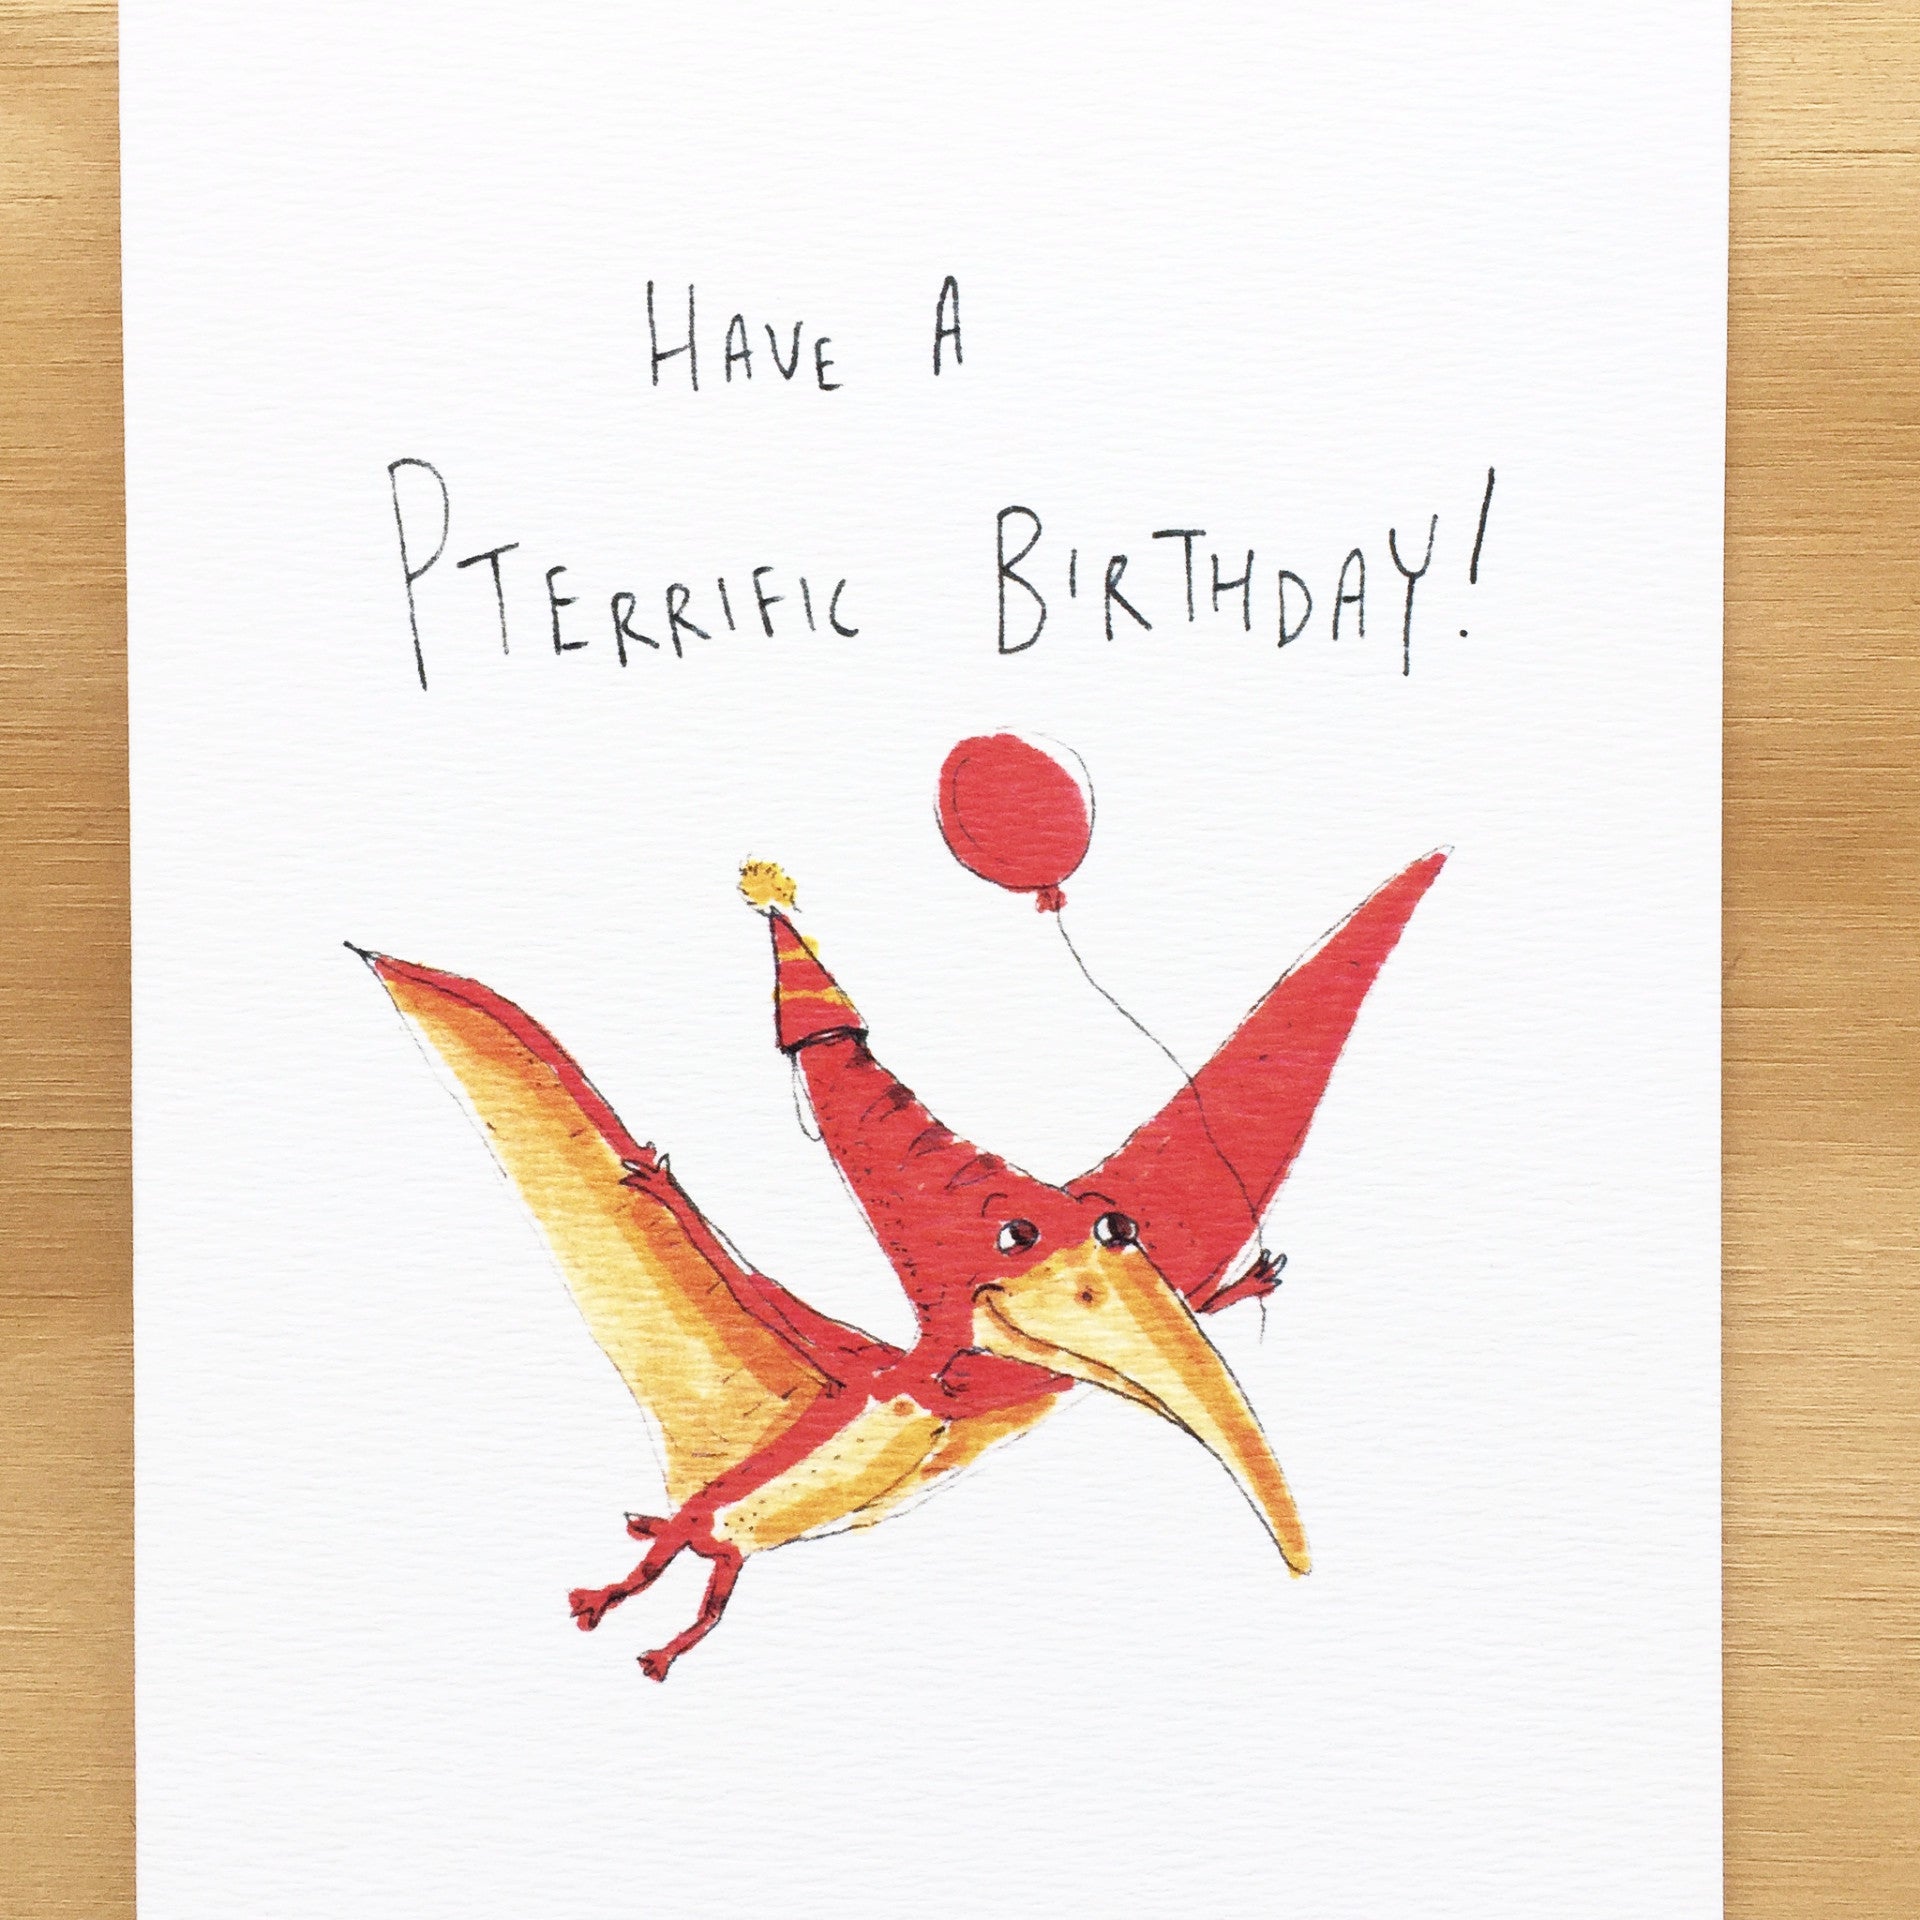 Have a Pterrific Birthday - Well Drawn